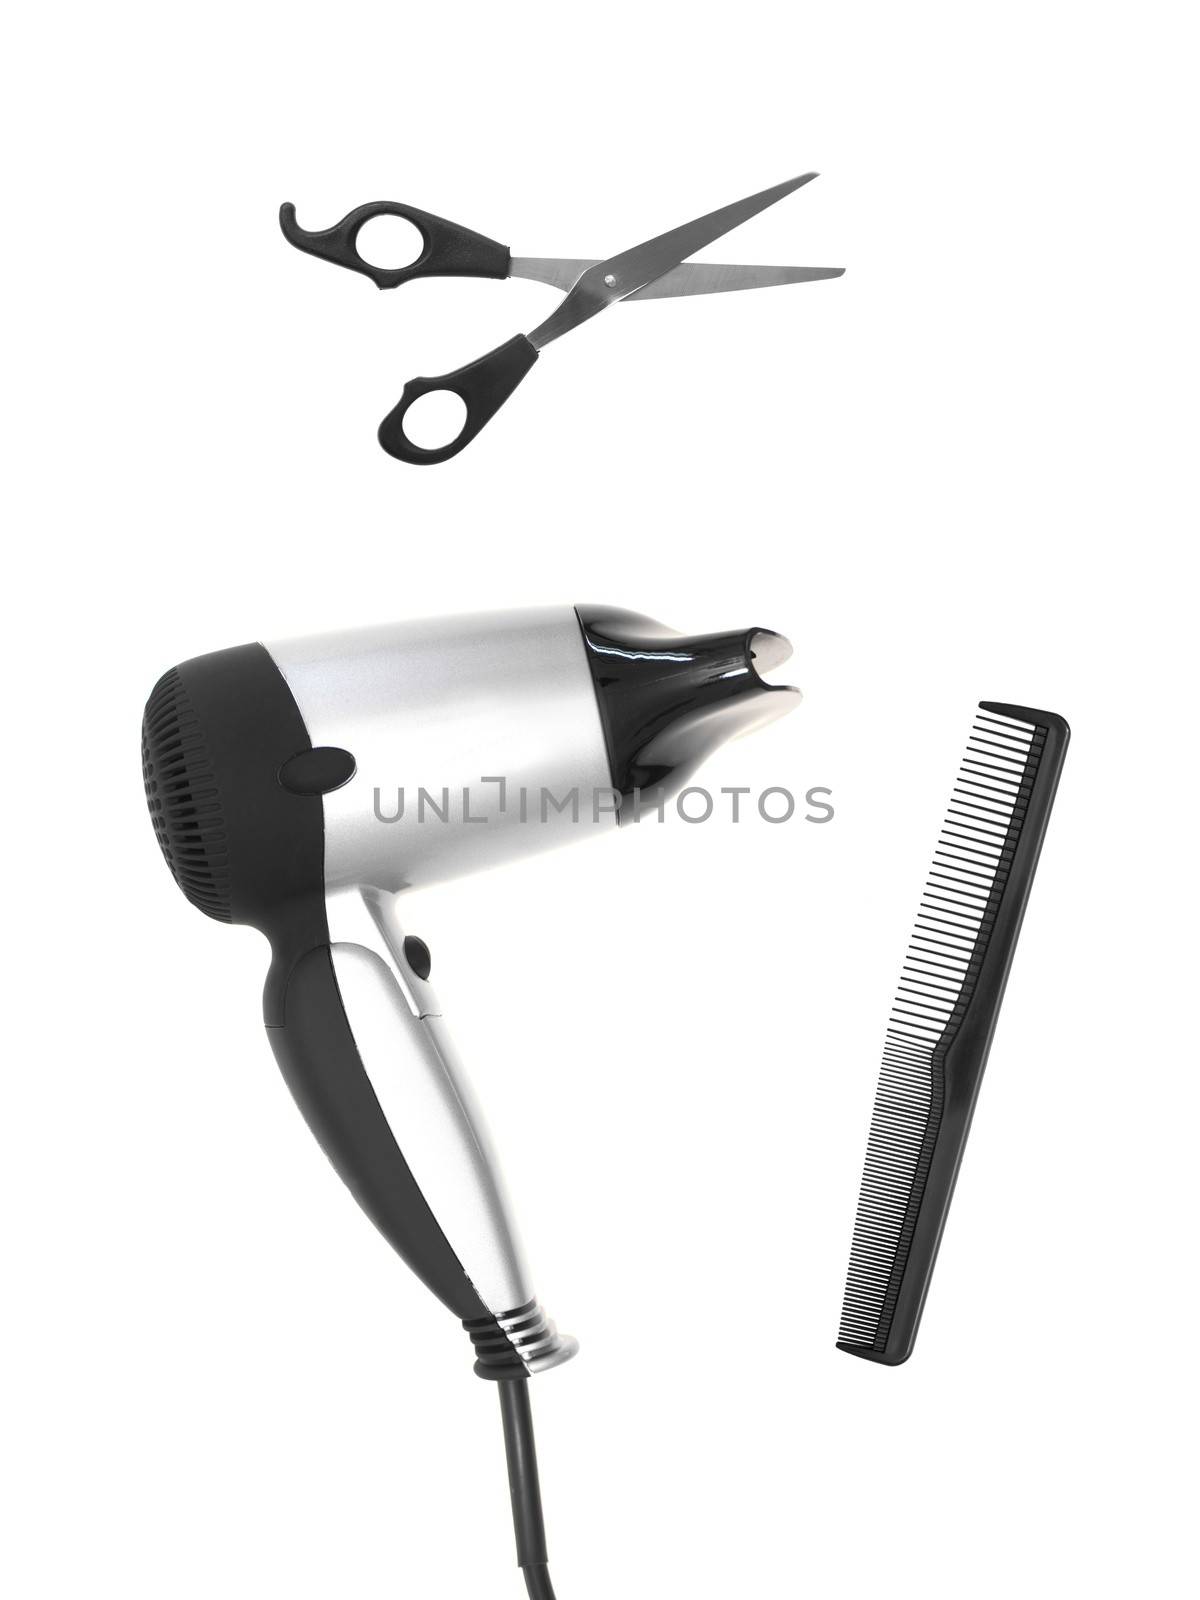 Hair Dryer by Kitch